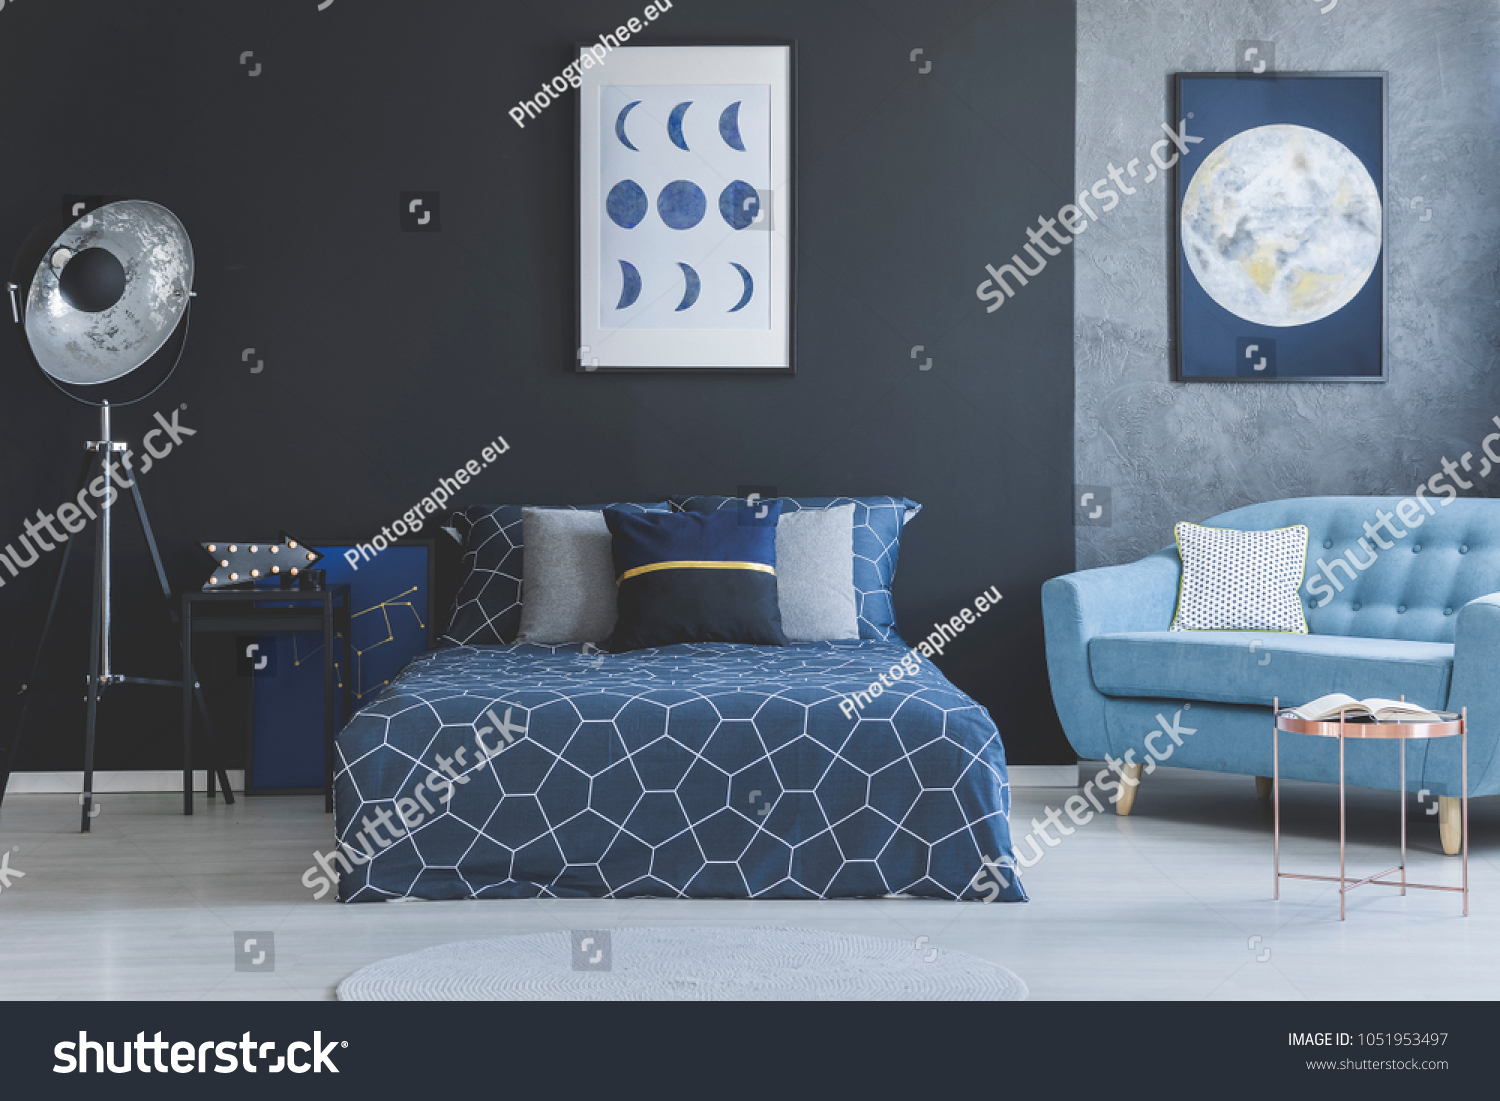 Blue sofa in bedroom interior with navy blue bed against dark wall with gallery of posters #1051953497